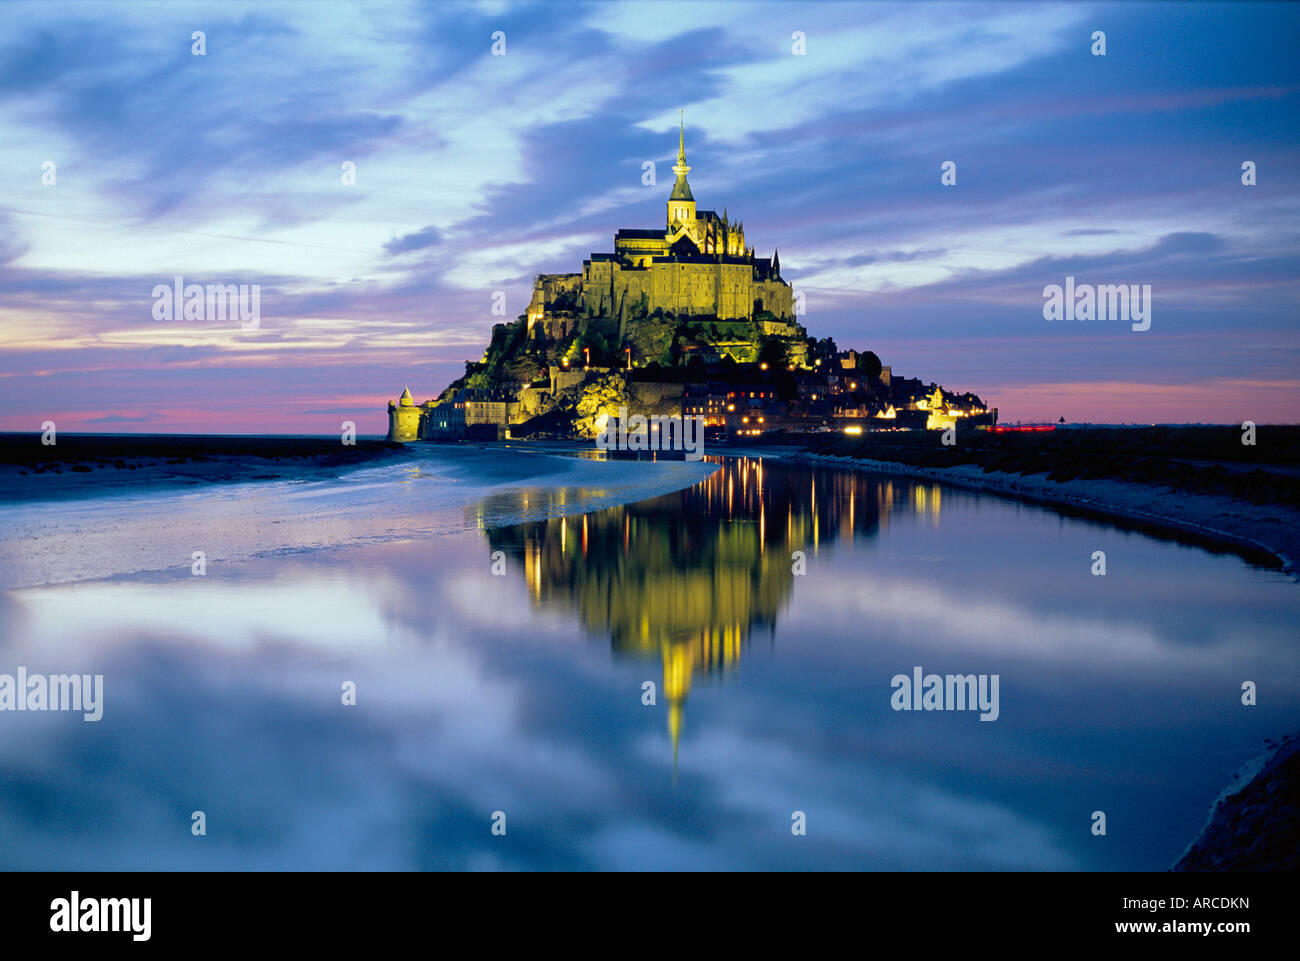 The mount by night reflected in water, Mont St Michel, Manche, Normandy, France Stock Photo